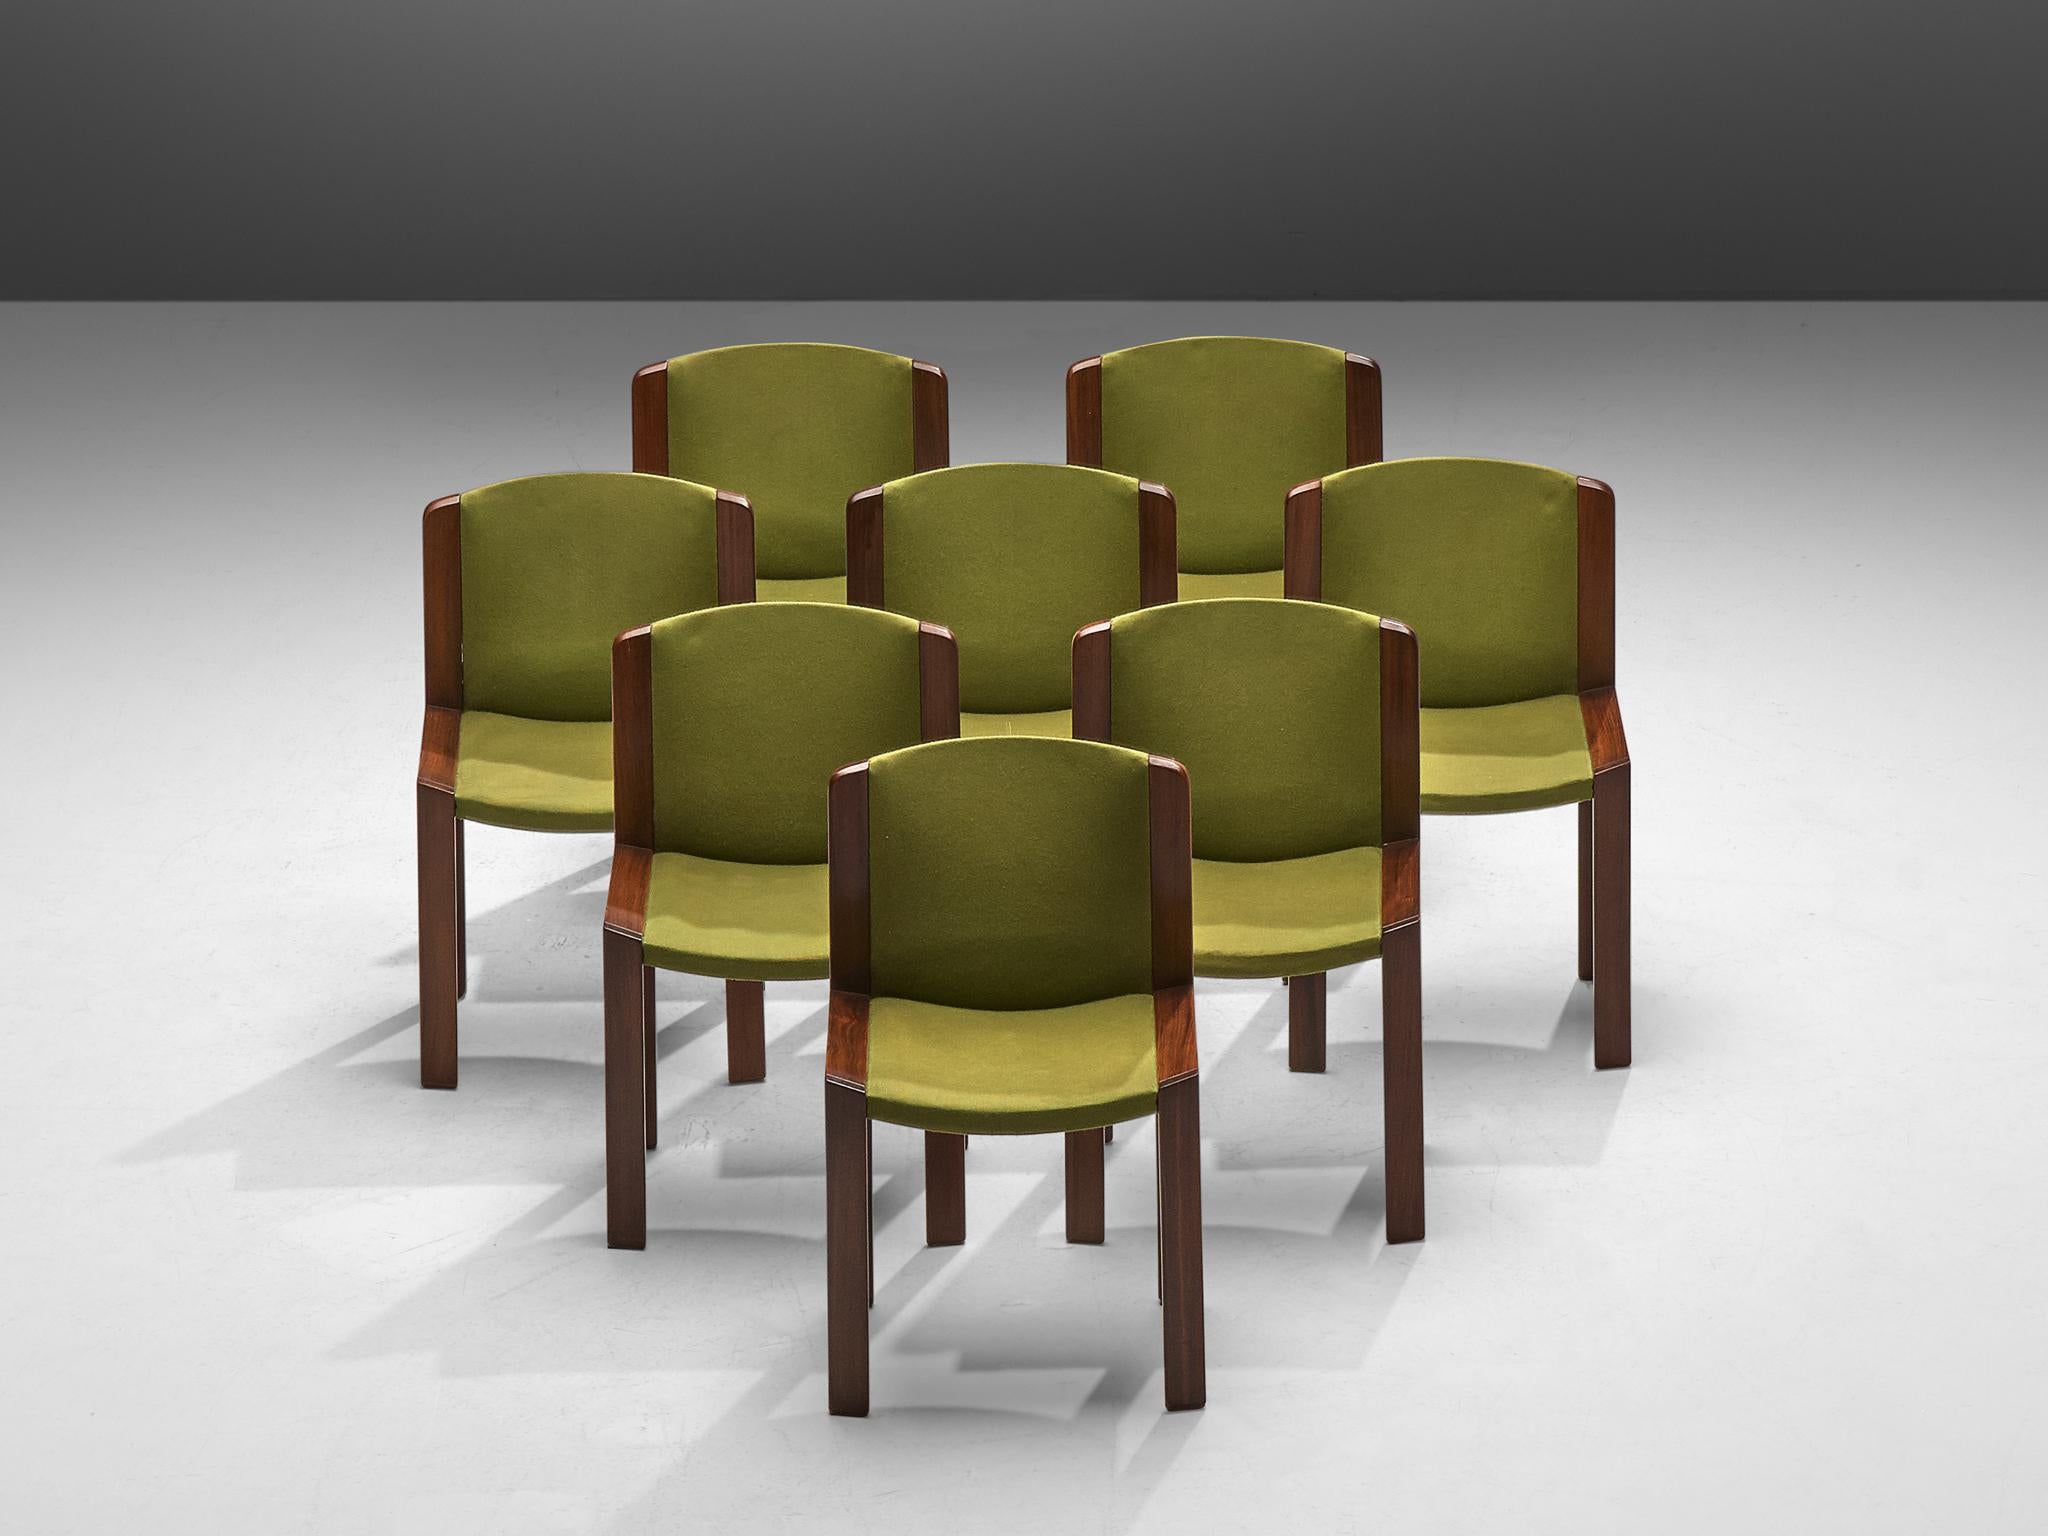 moss green chairs